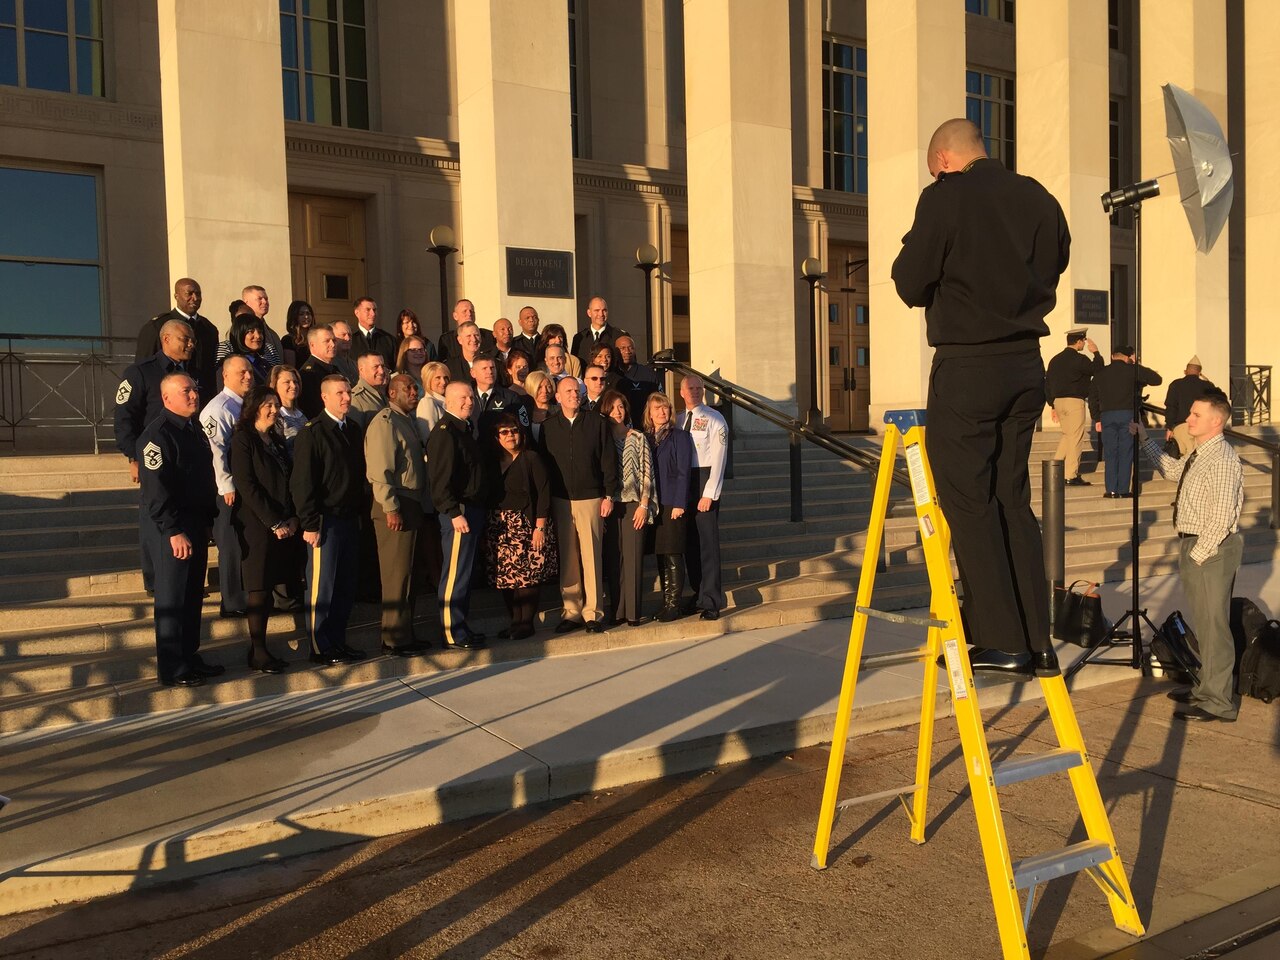 The U.S. military’s most-senior noncommissioned officers and their spouses set up for a picture in front of the Pentagon before beginning the second day of the Defense Senior Enlisted Leadership Council conference, Dec. 1, 2016. DoD photo by Jim Garamone